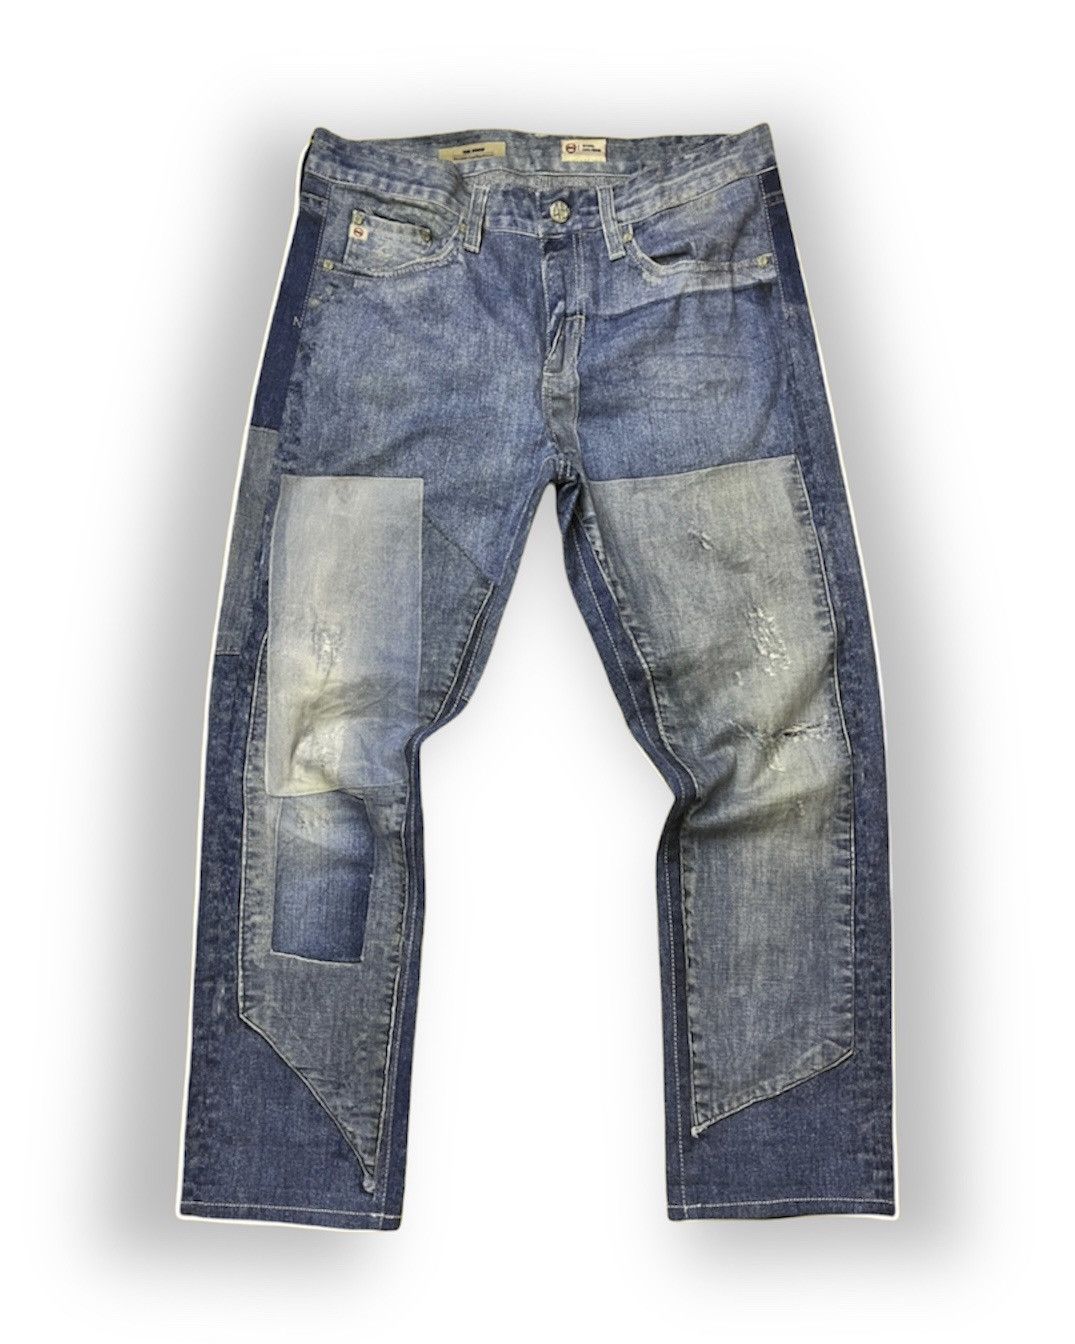 DISTRESSED PRINTED AG ADRIANO GOLDSCHMIED DENIM PANTS - 1